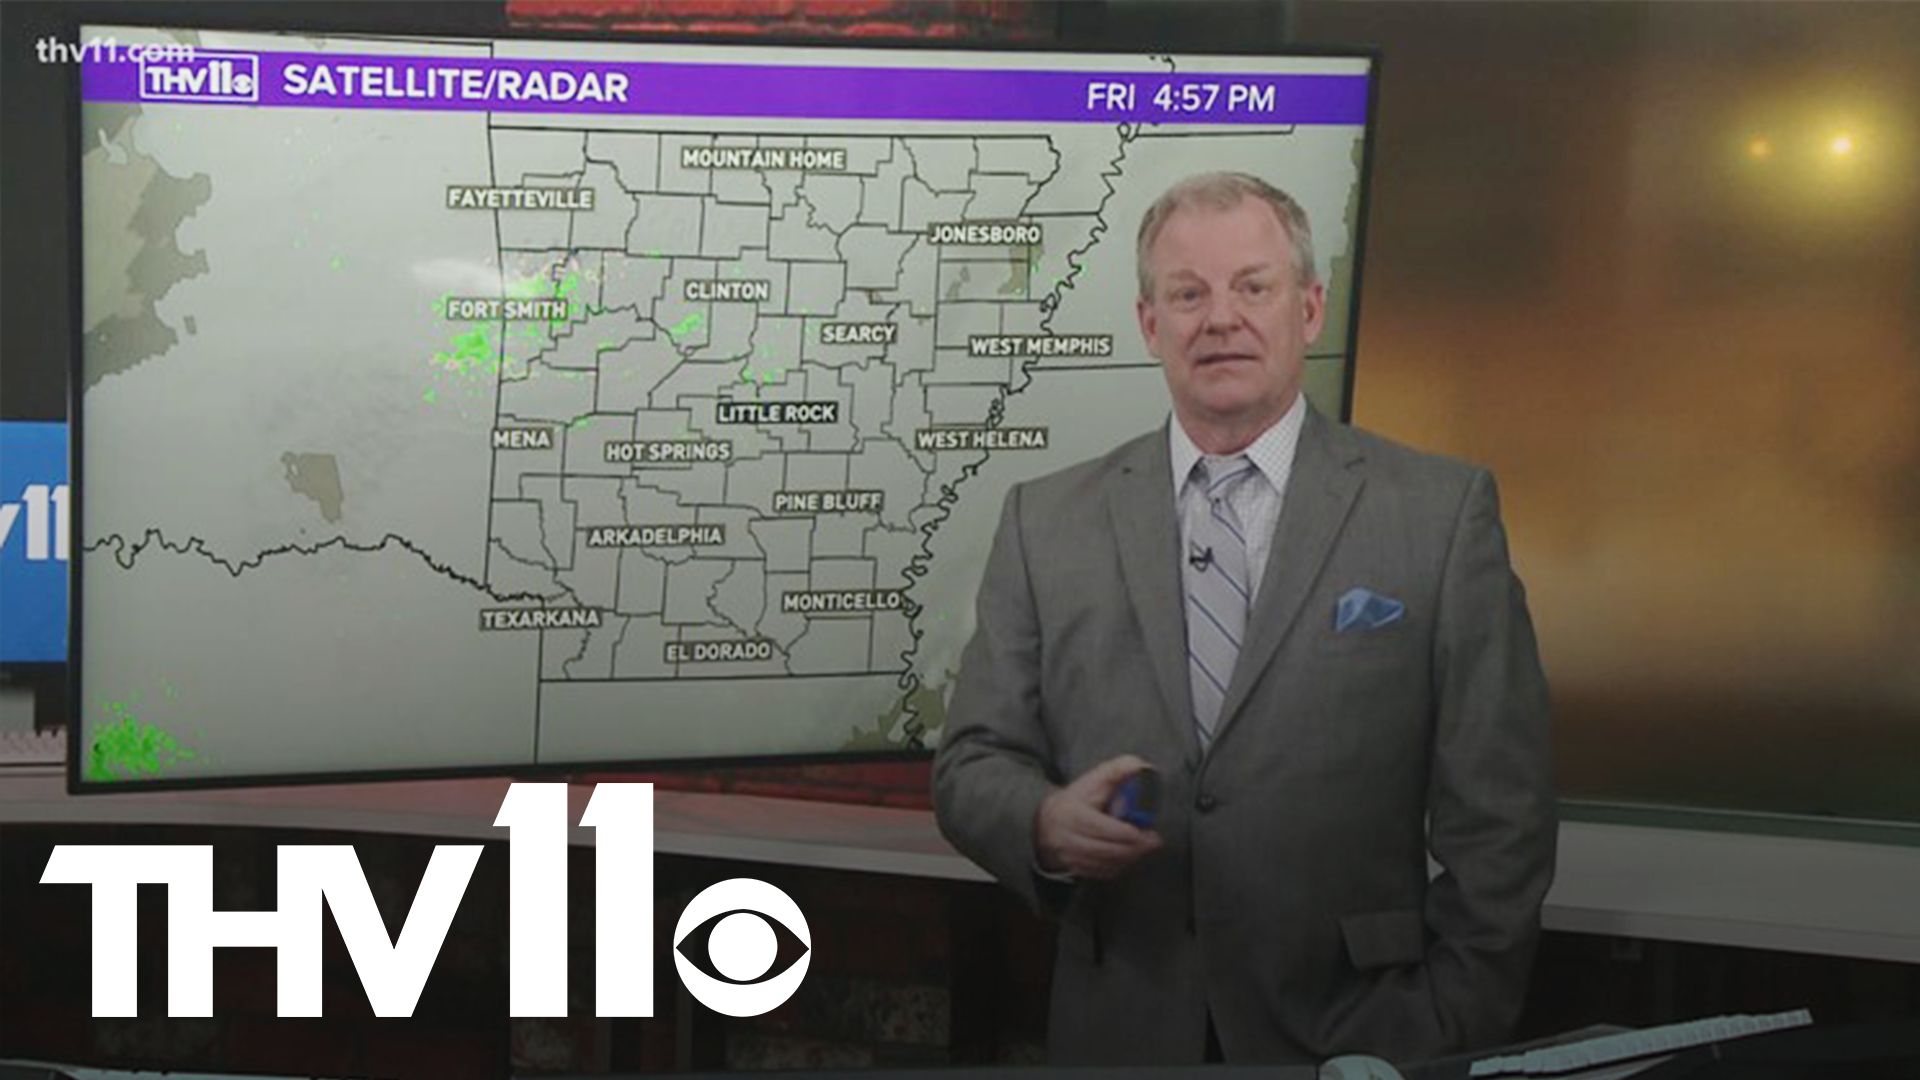 The new year is already turning out better than the last with the return of Chief Meteorologist Tom Brannon!